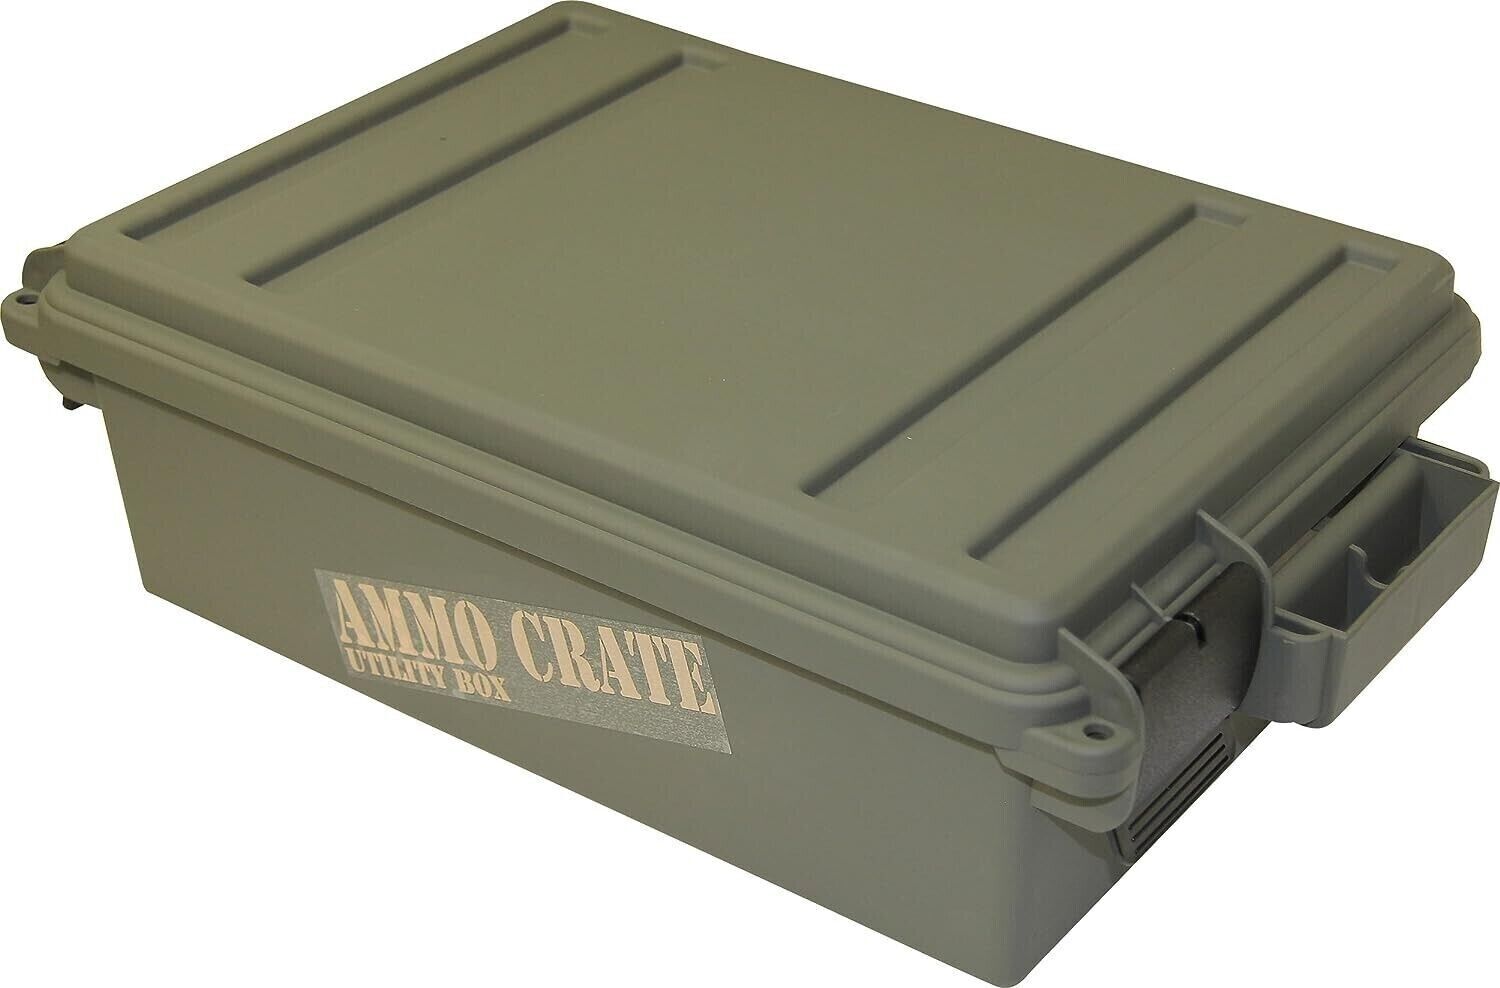 MTM ACR4-18 Ammo Crate Utility Box-Carry up to 65lbs of gear-Stackable design